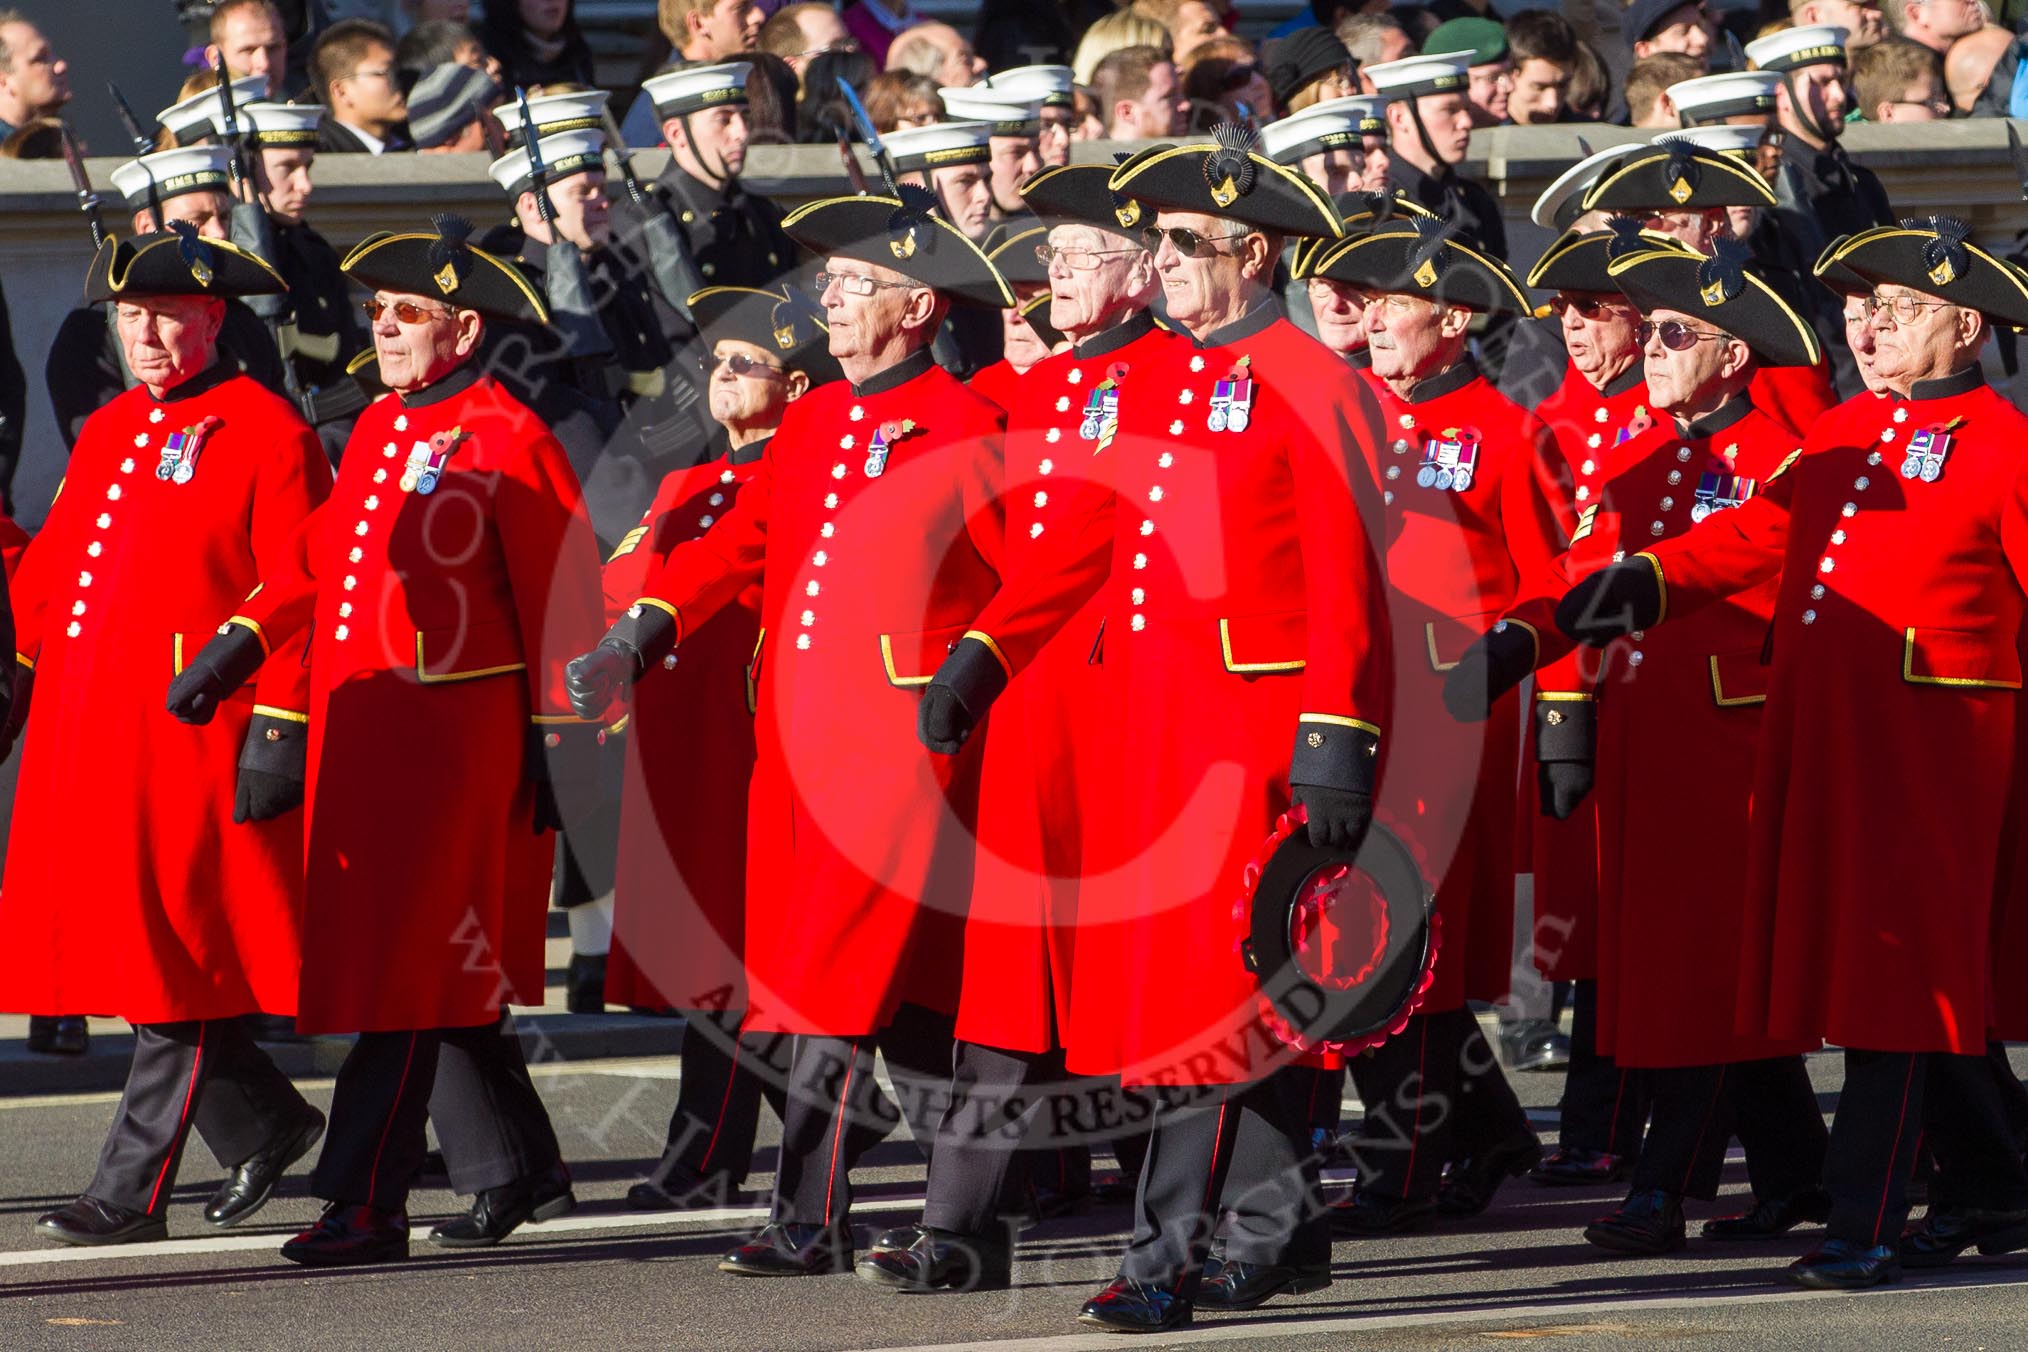 Remembrance Sunday 2012 Cenotaph March Past: Group E43 - Royal Hospital, Chelsea (Chelsea Pensioners)..
Whitehall, Cenotaph,
London SW1,

United Kingdom,
on 11 November 2012 at 11:43, image #336